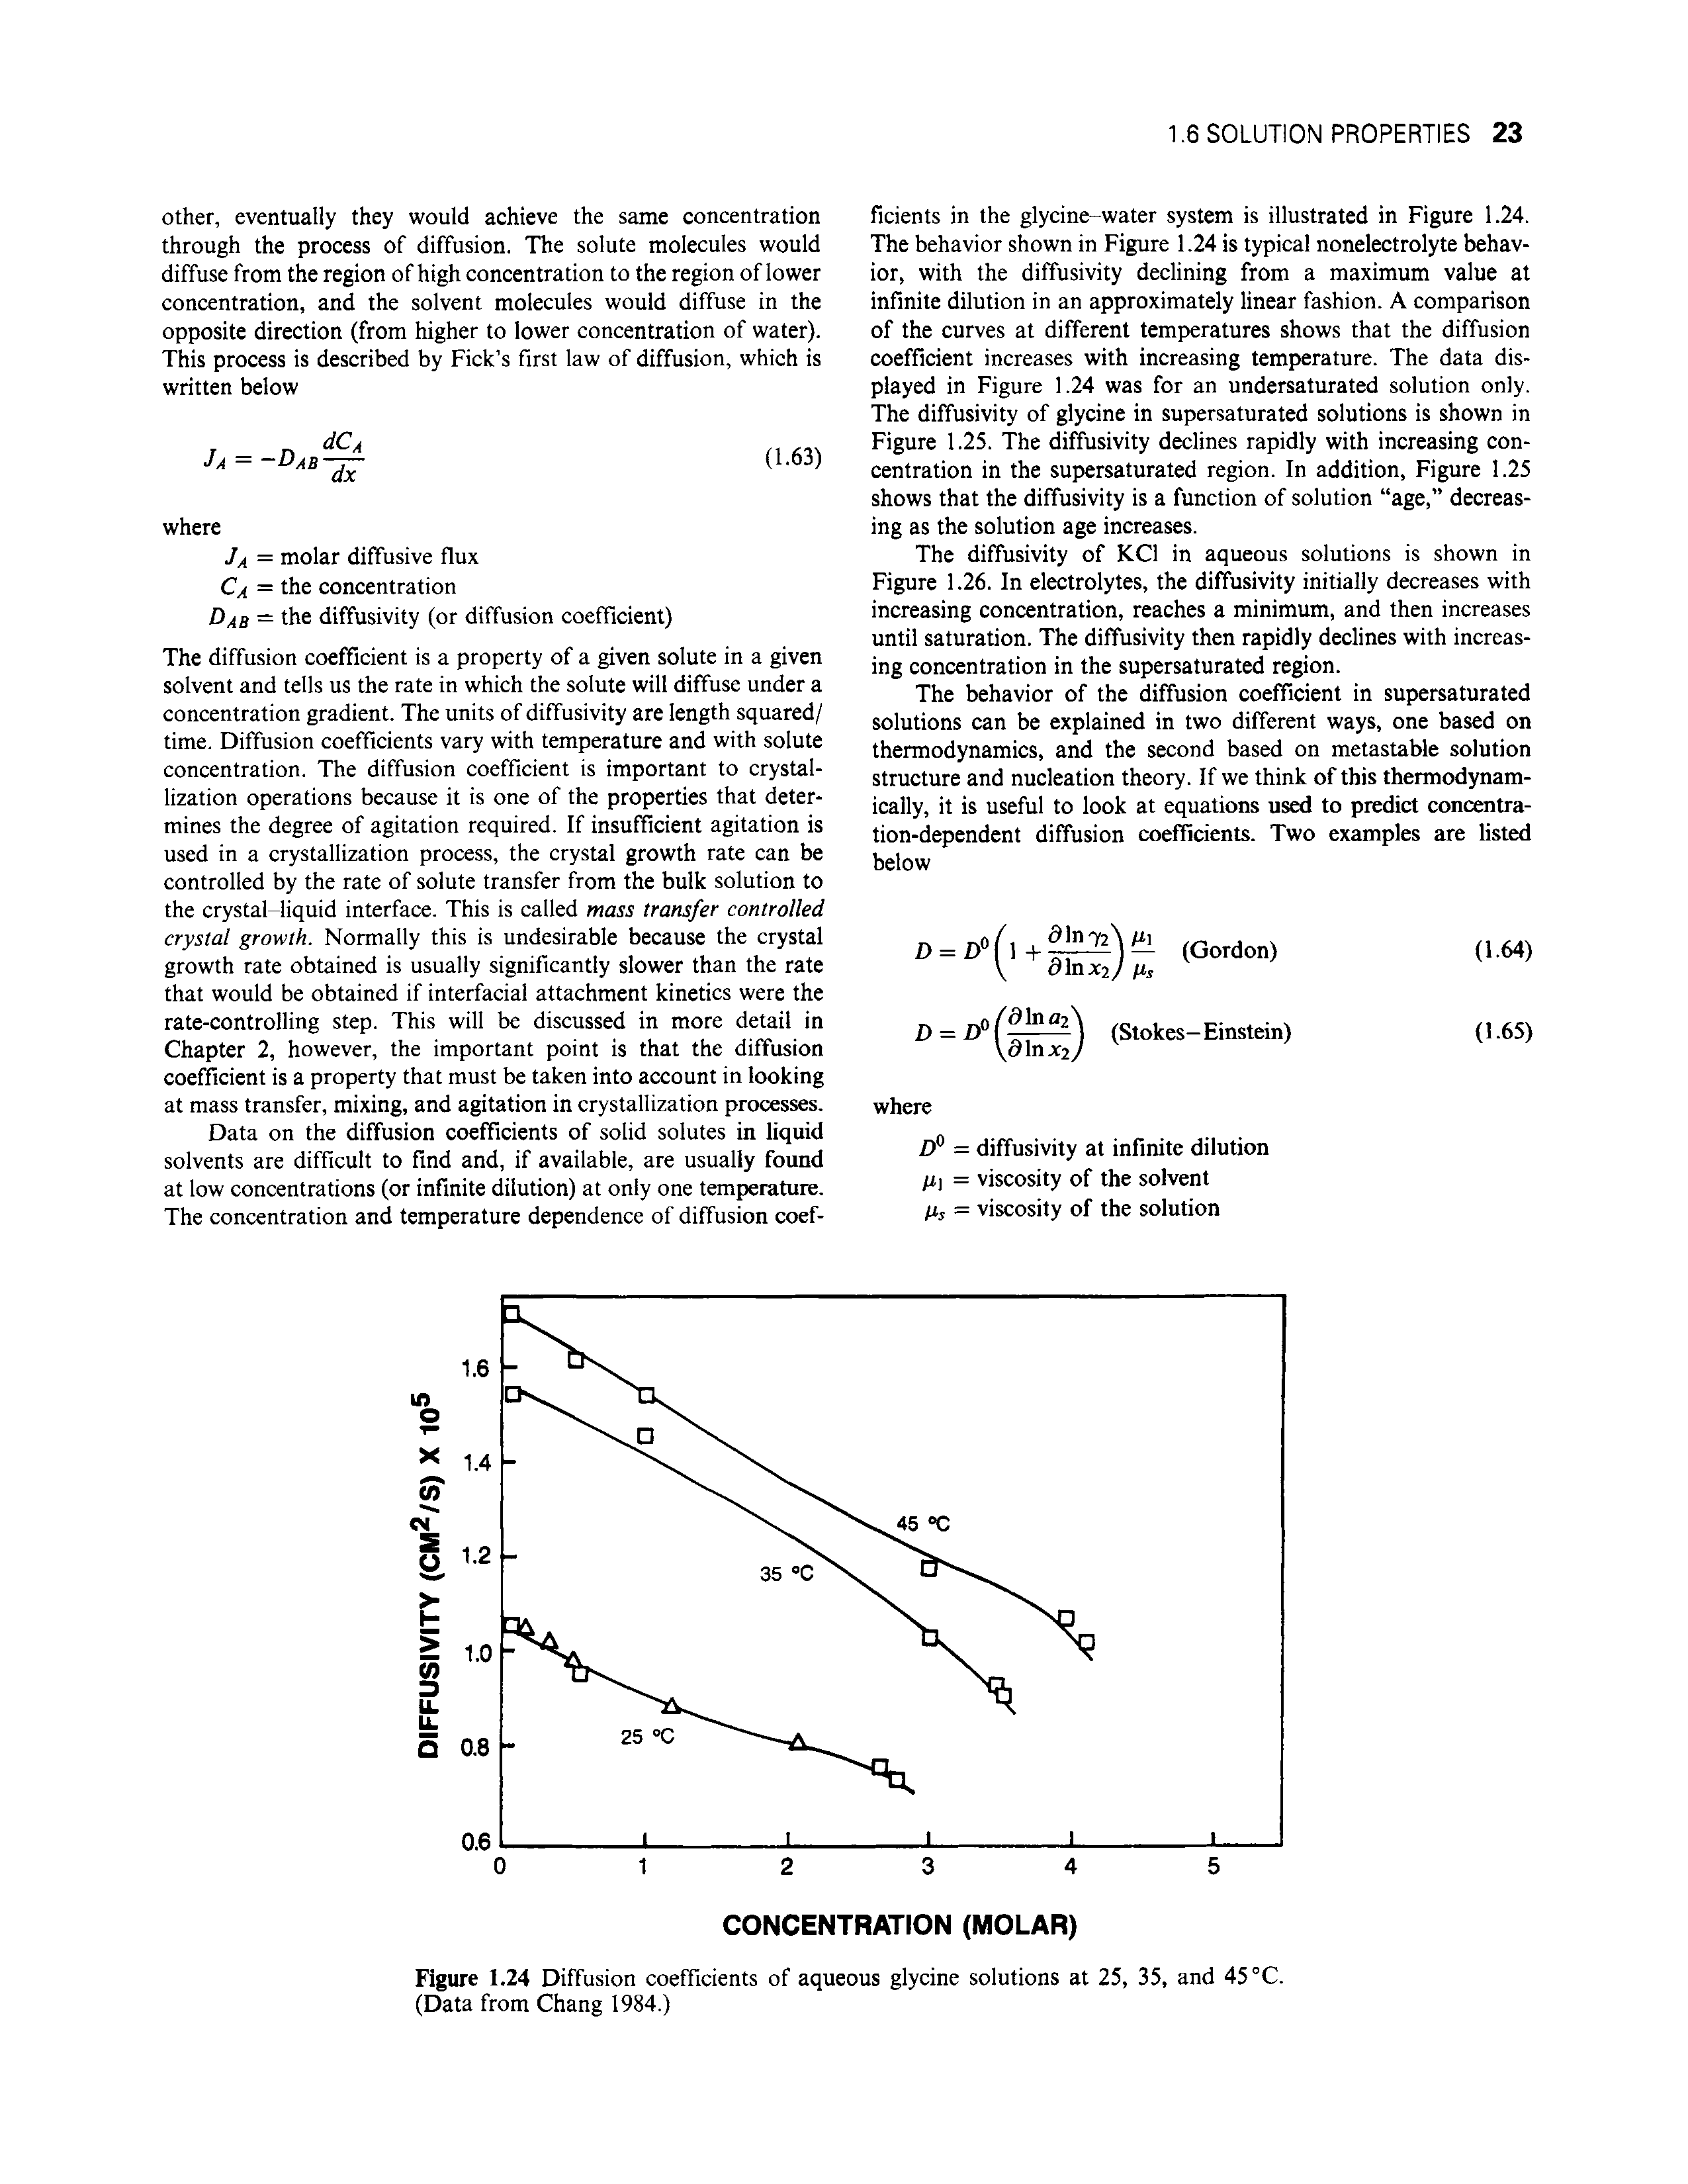 Figure 1.24 Diffusion coefficients of aqueous glycine solutions at 25, 35, and 45 °C. (Data from Chang 1984.)...